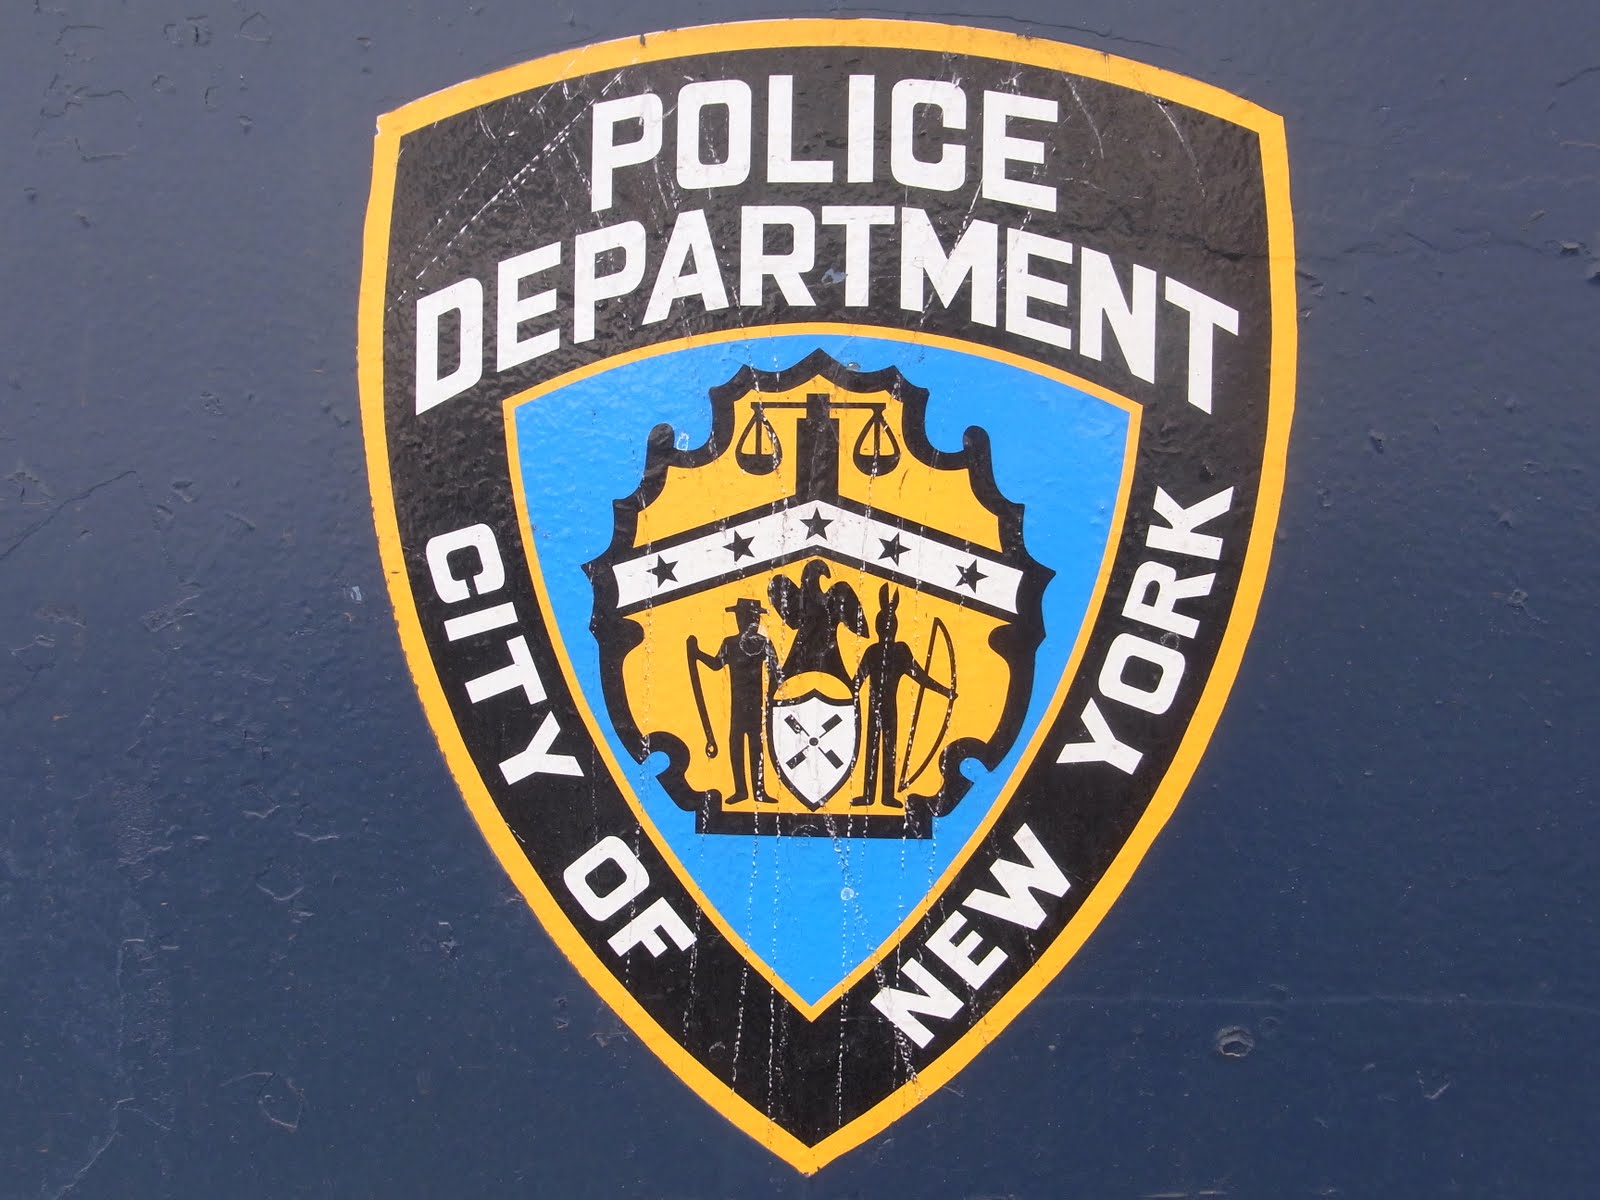 NYPD Wallpaper. NYPD Wallpaper, NYPD 3840 X 2160 Wallpaper and NYPD Blue Wallpaper